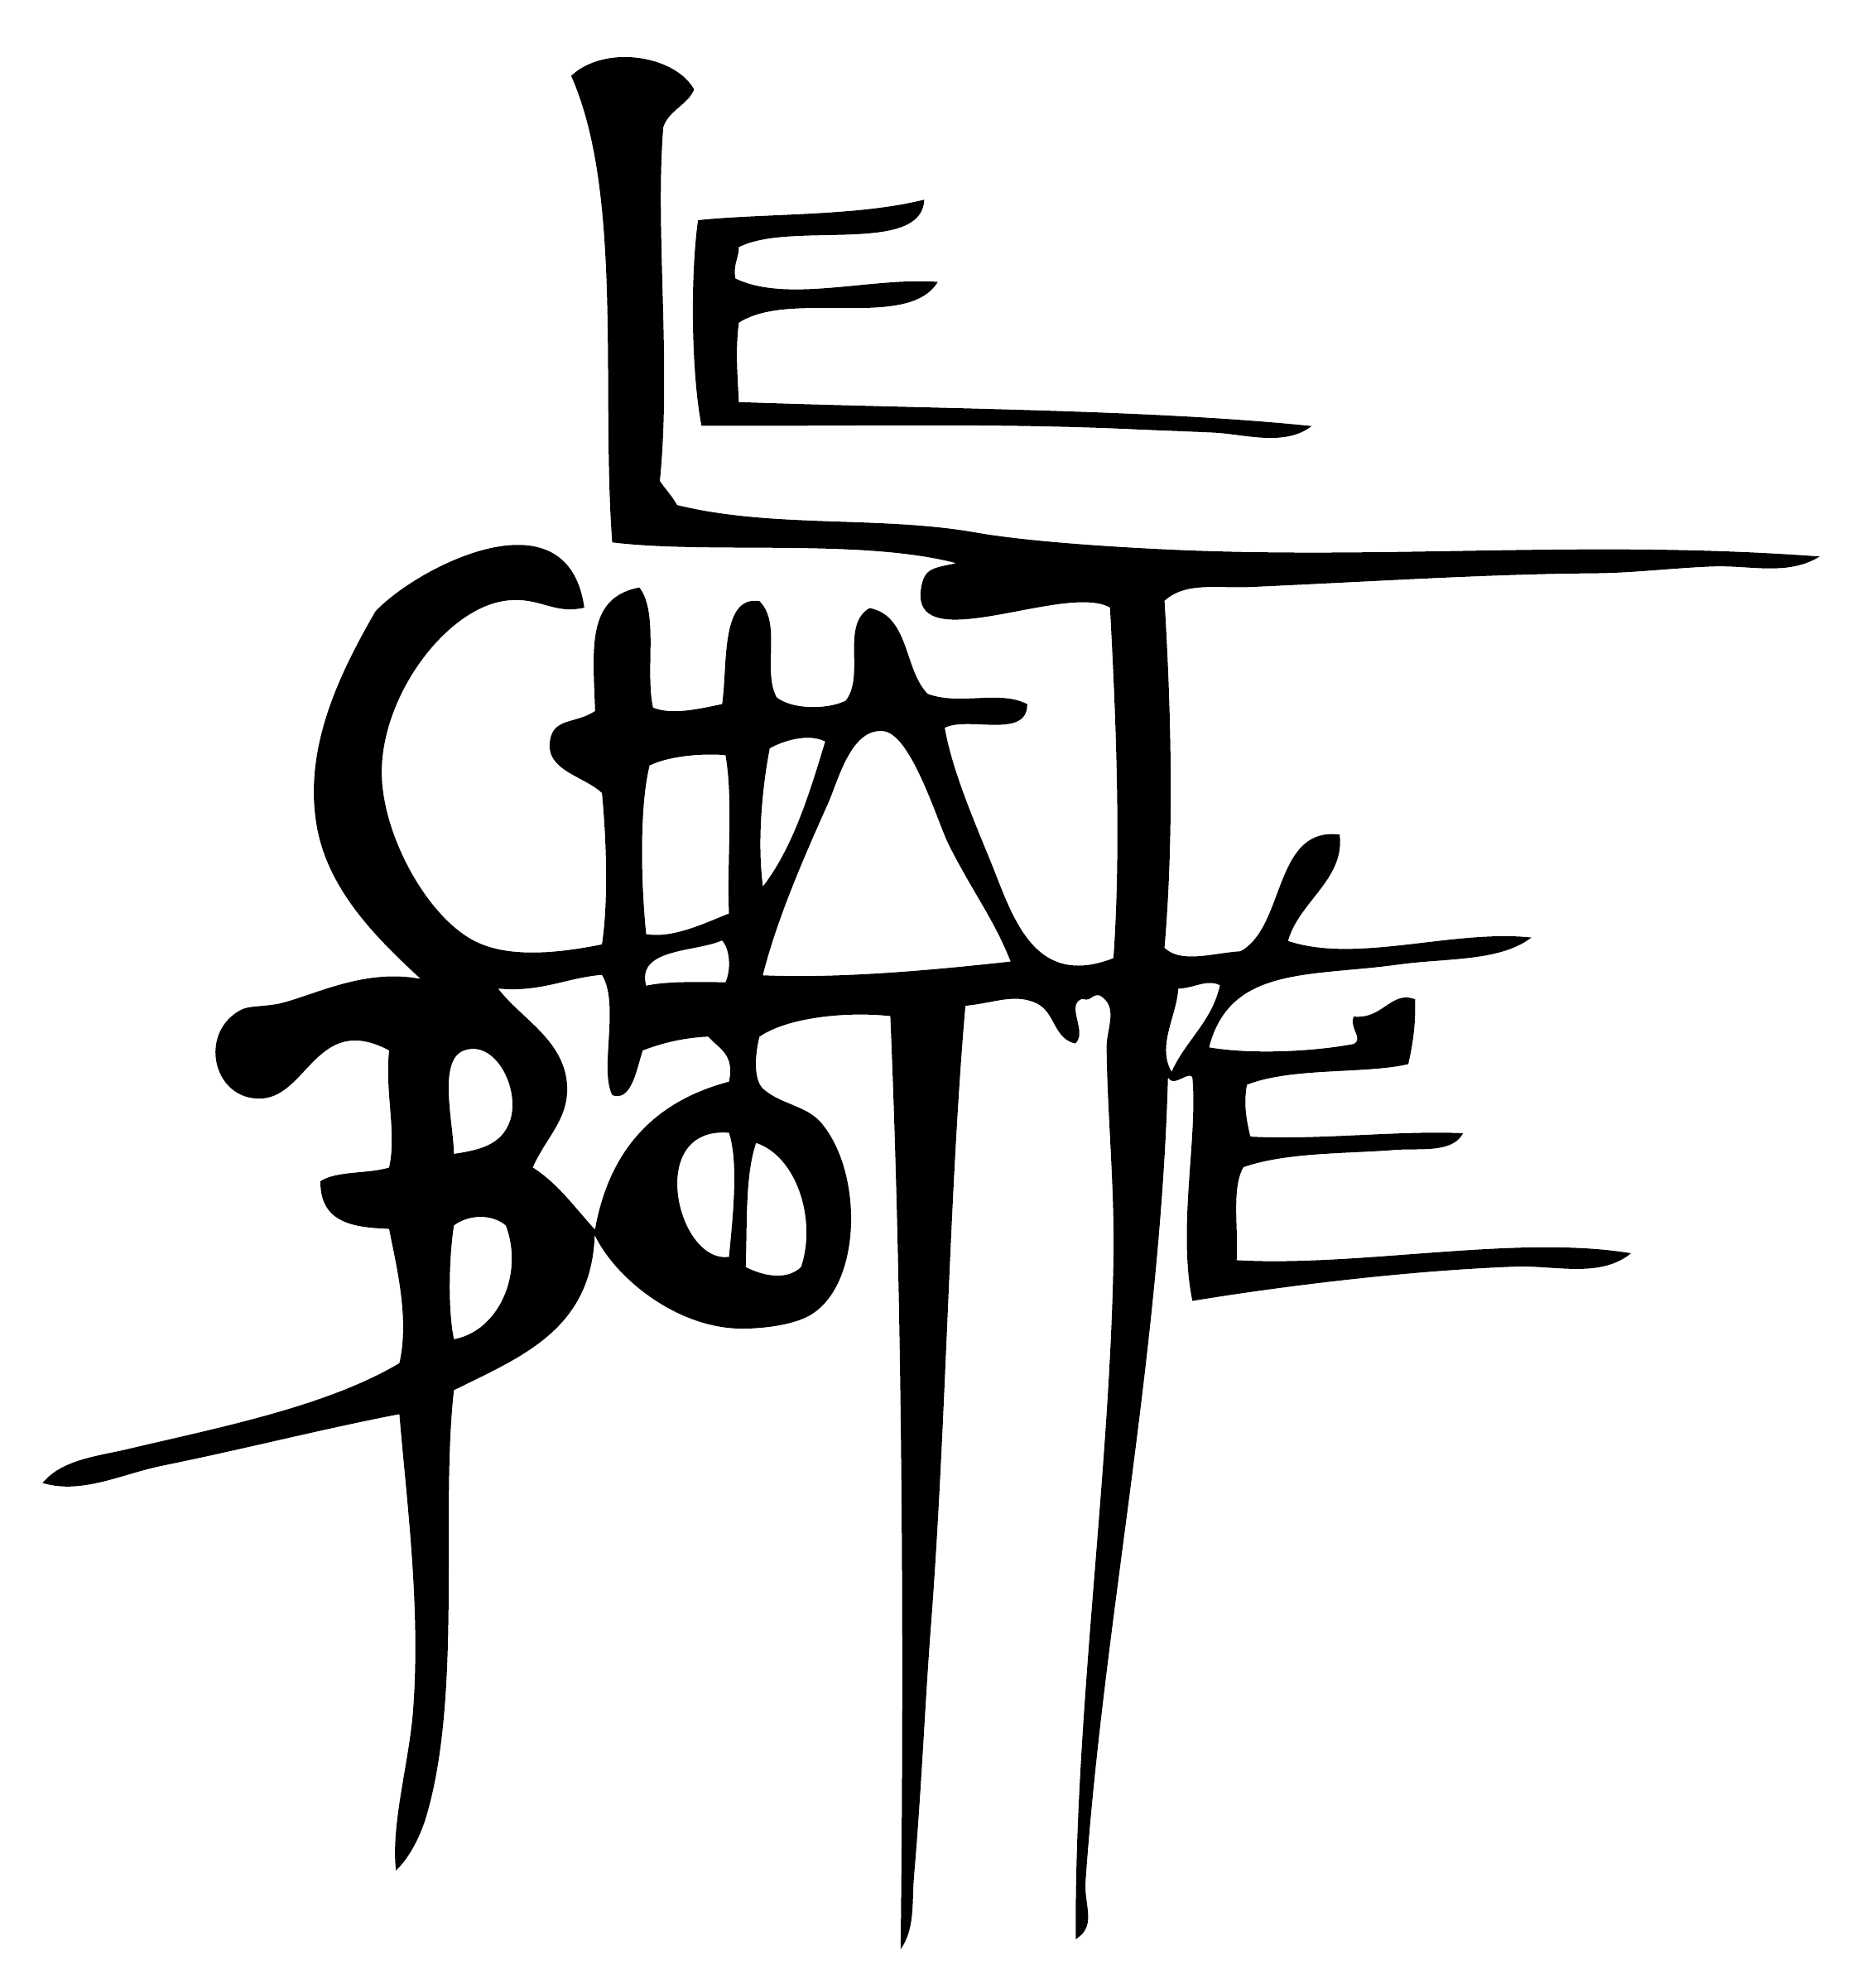 2. CHAT-BOTTE.png